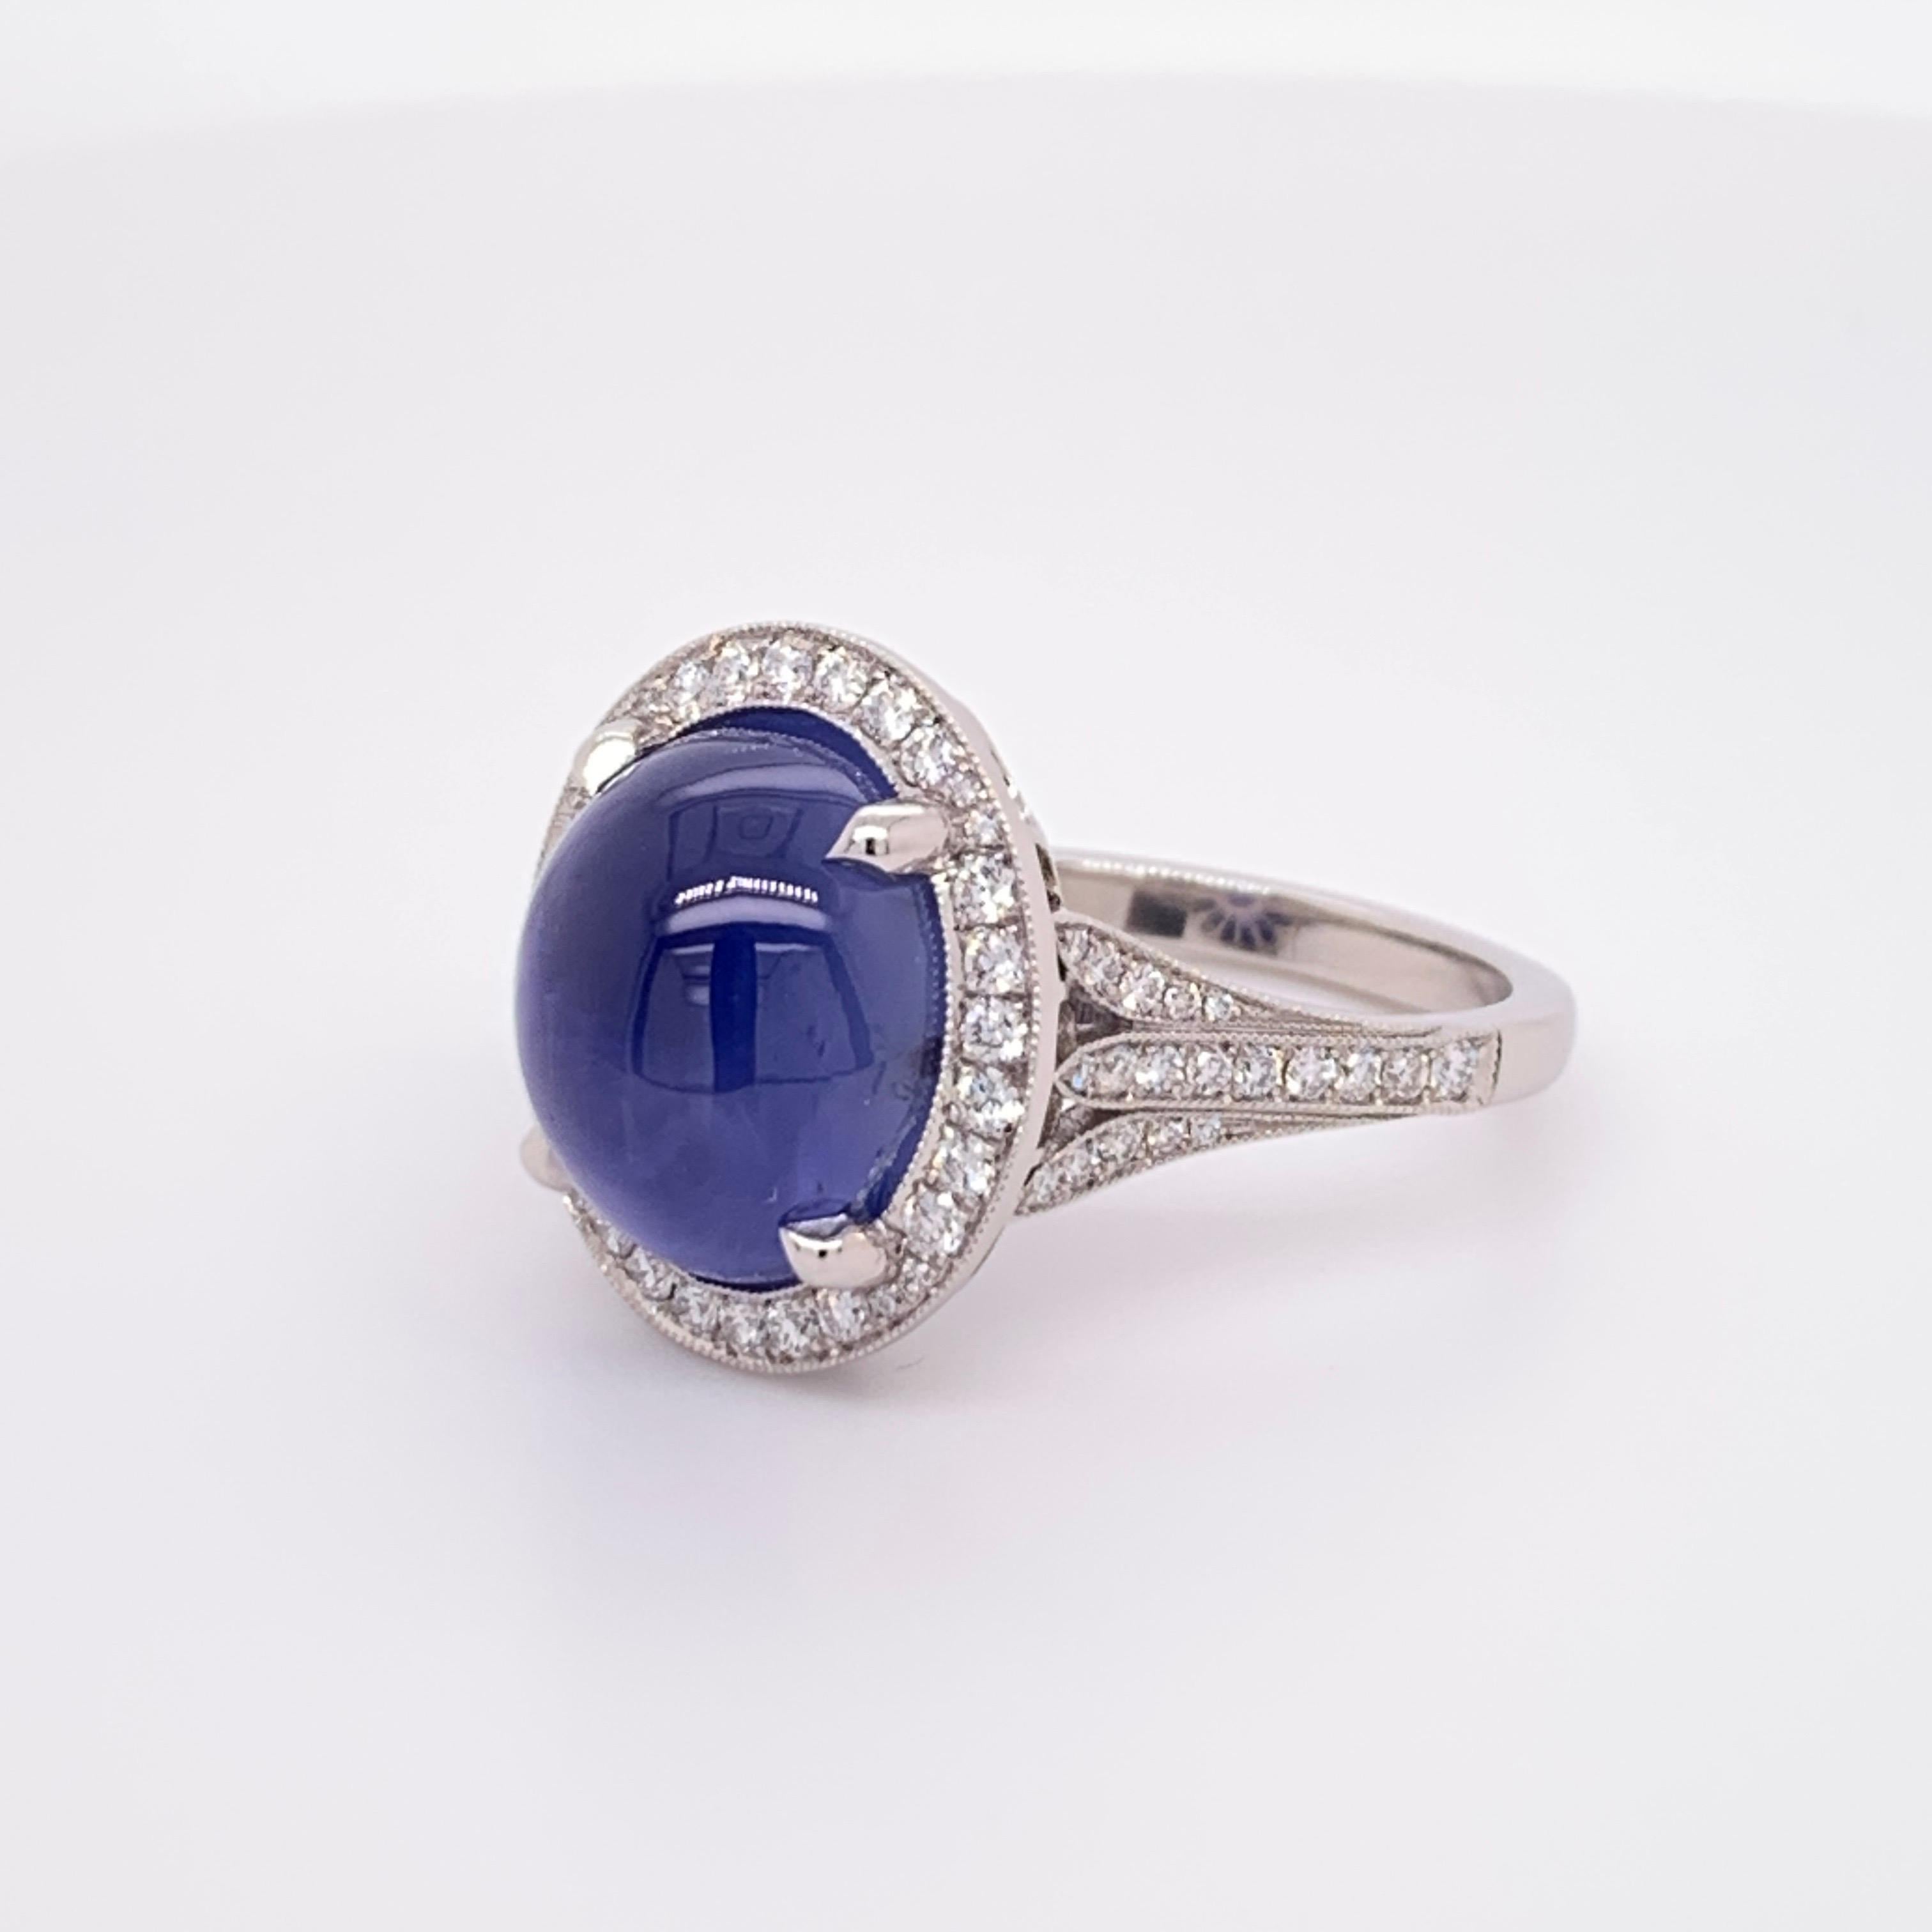 A stunning and elegant Natural Unheated Blue Star Sapphire GIA certified. NO HEAT TREATMENT.

The piece is platinum weighs 9.5 grams and the size is 5.75.

Set with 70 natural round brilliant diamonds weighing 0.45cts.